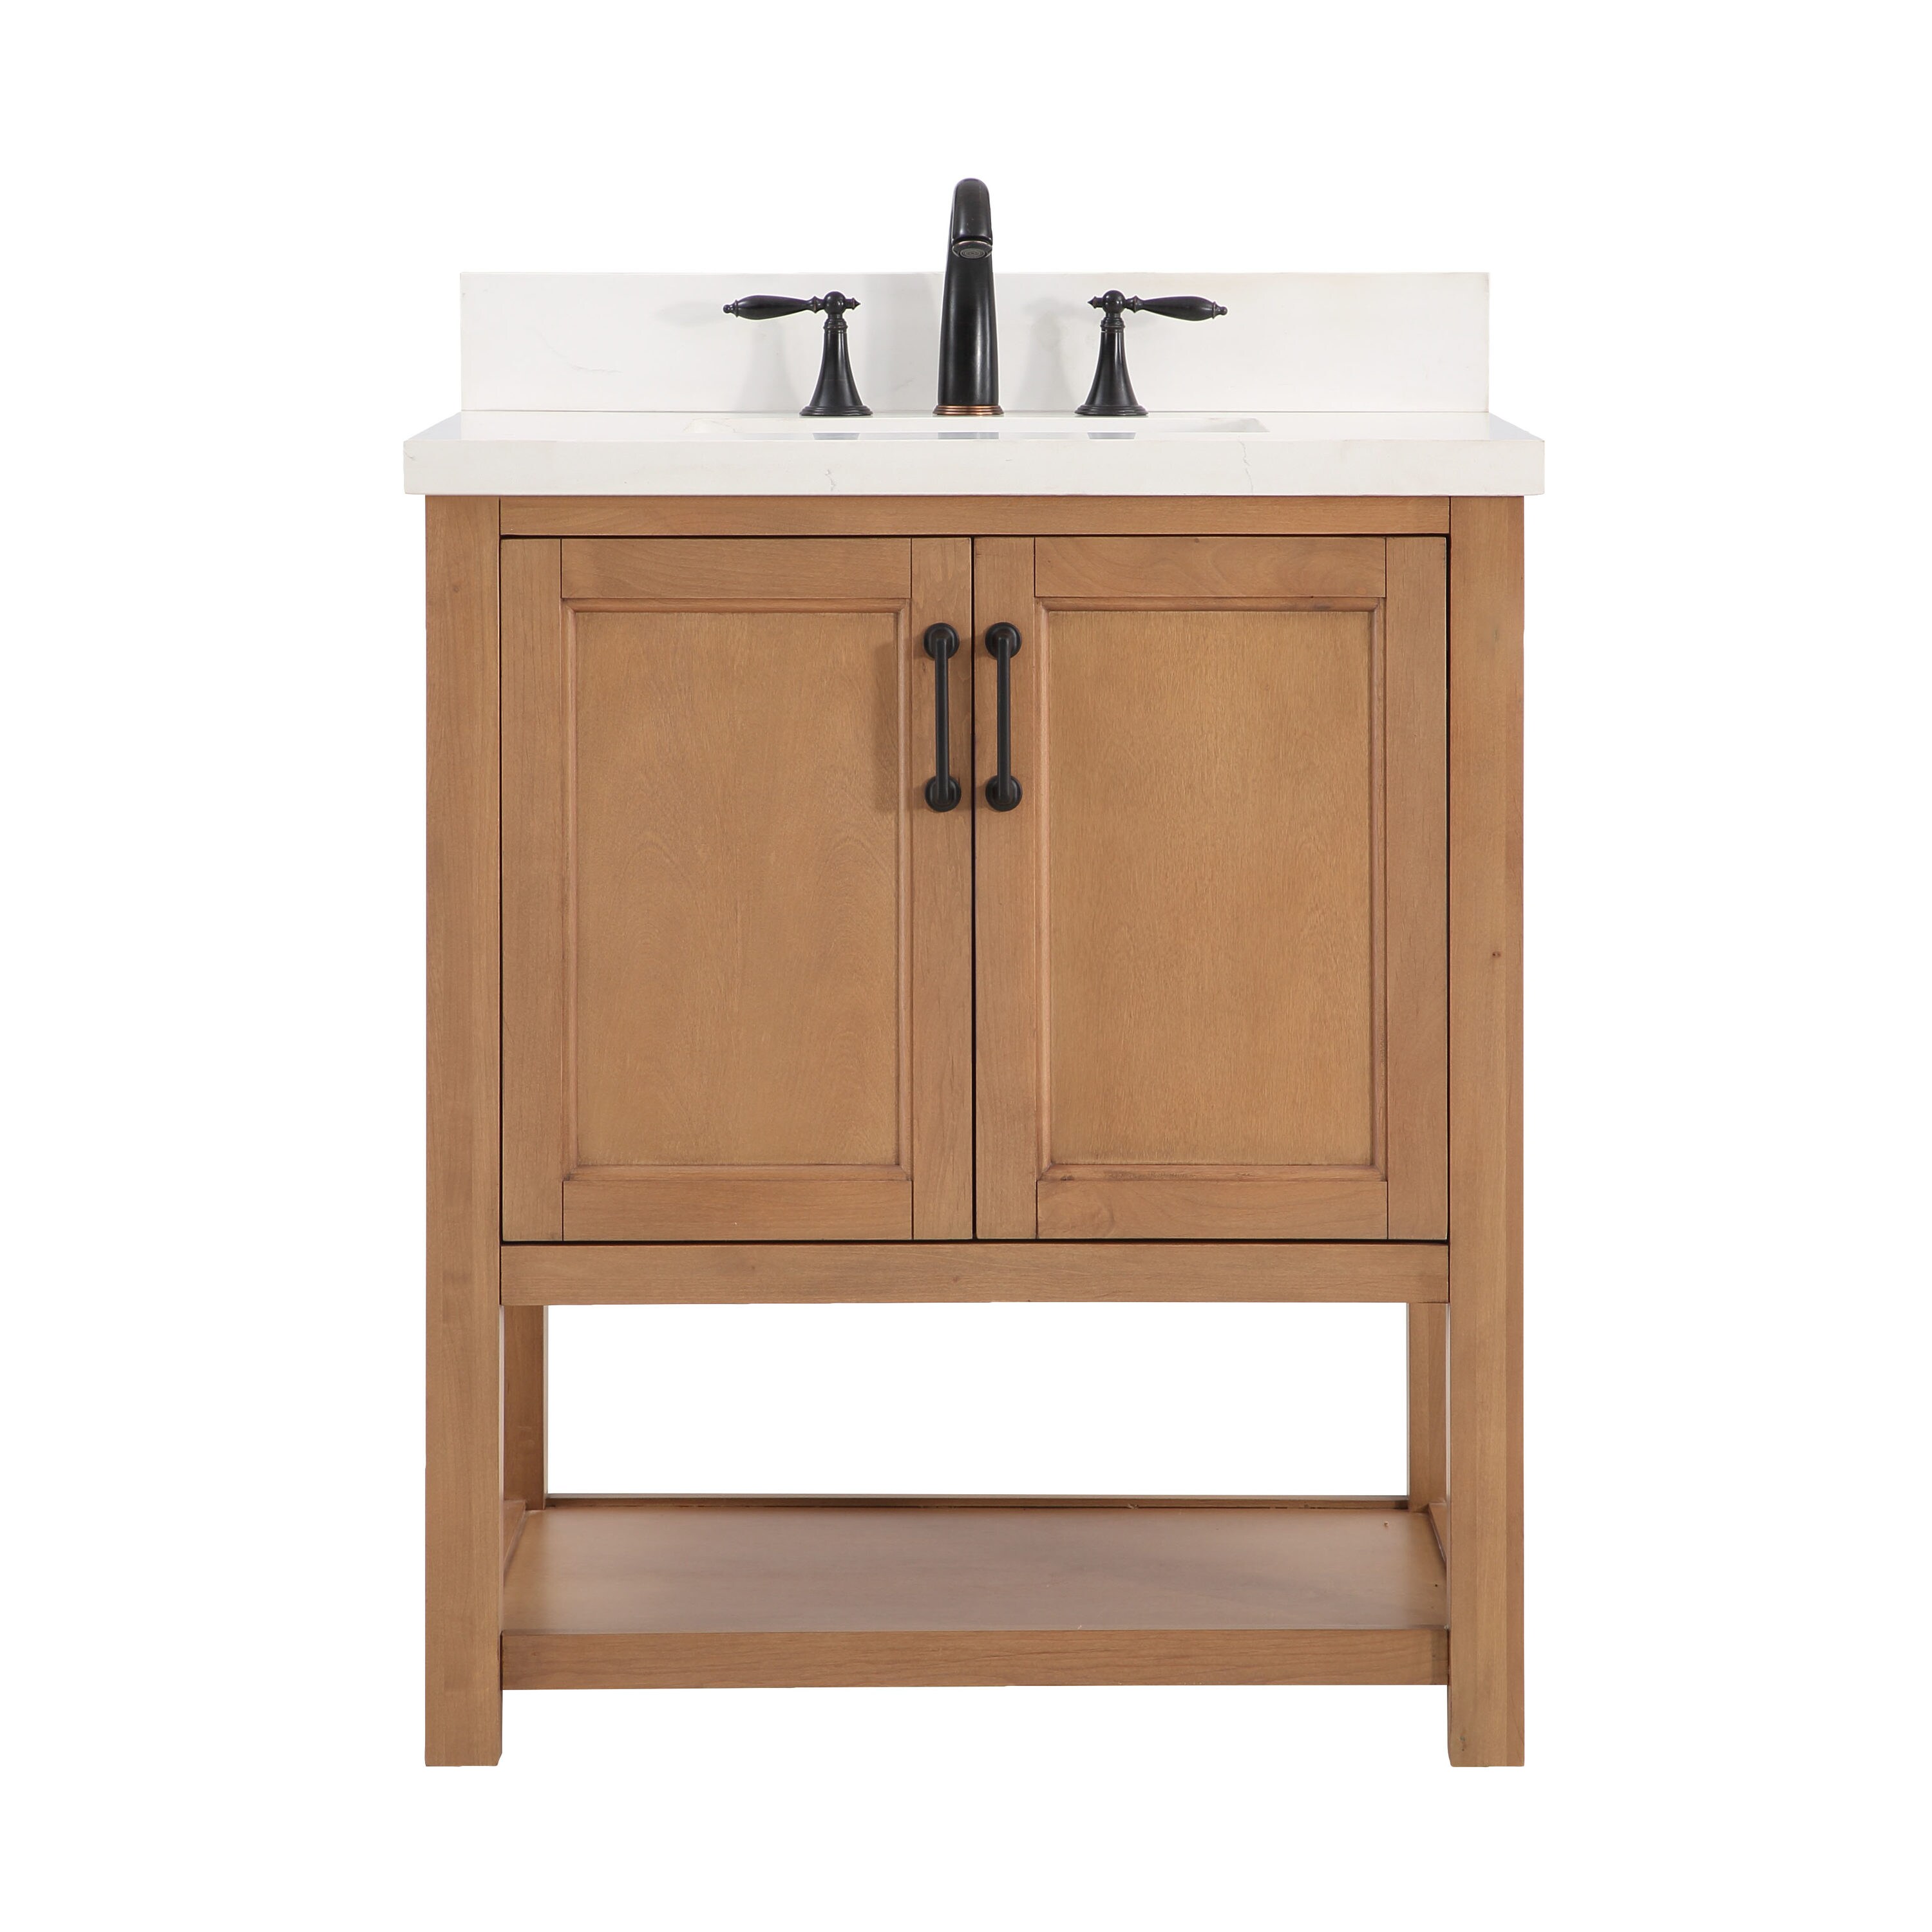 Allen Roth Harwood 30 In Natural Undermount Single Sink Bathroom Vanity With White And Gray